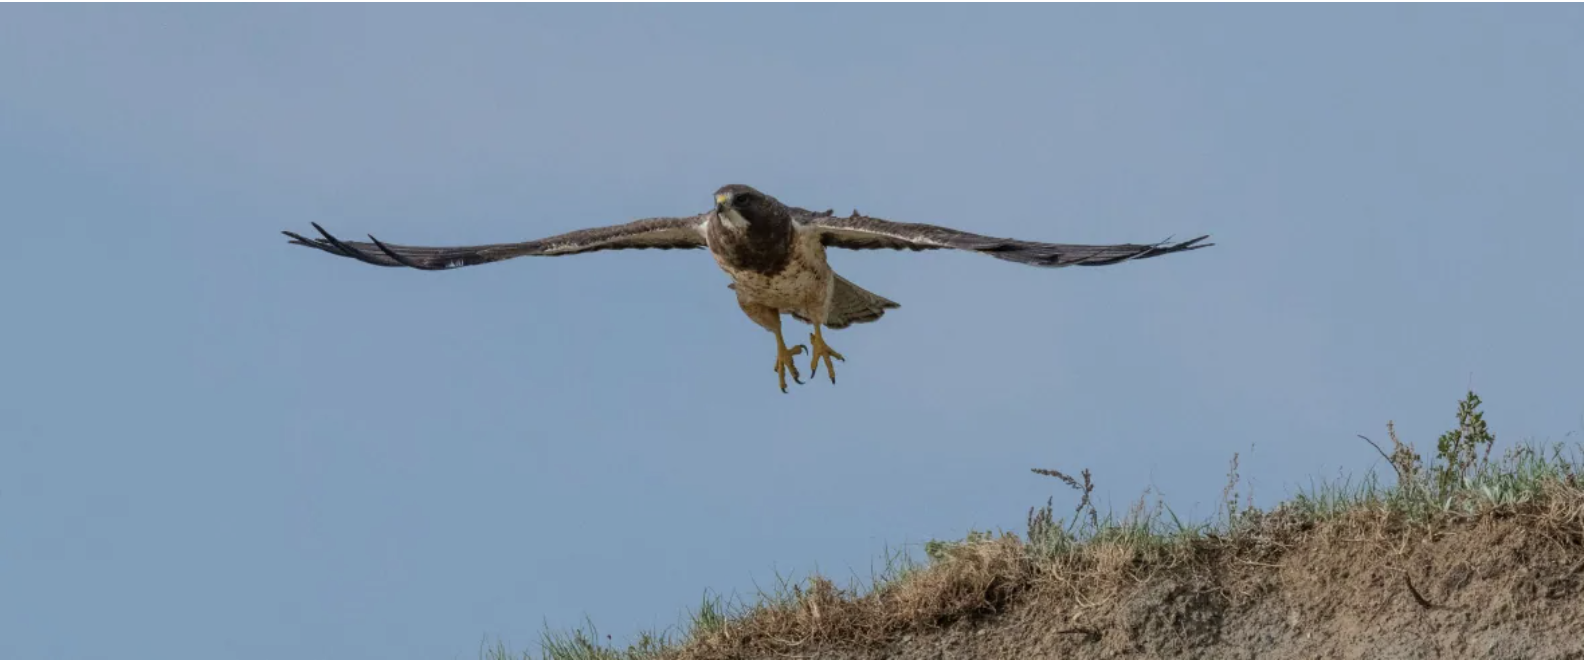 (Jason Bantle/Nature Conservancy of Canada) Swainson’s hawks nest across the western United States and Canada, according to the University of Minnesota. (Jason Bantle/Nature Conservancy of Canada)